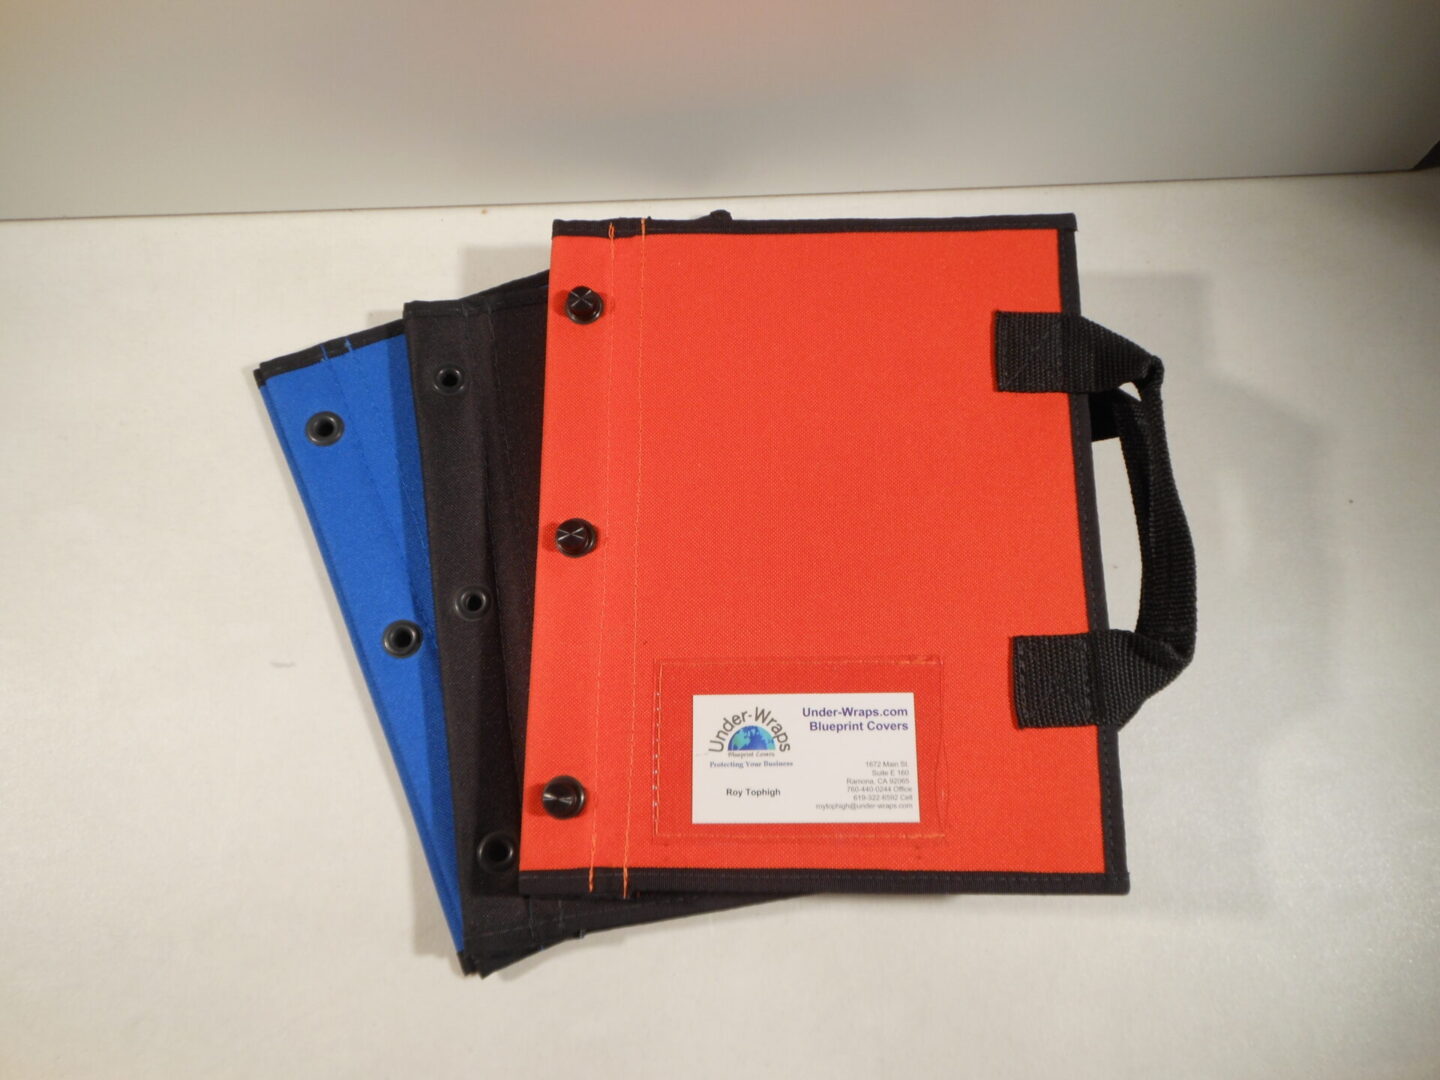 Three notebooks with a handle and two of them are orange.